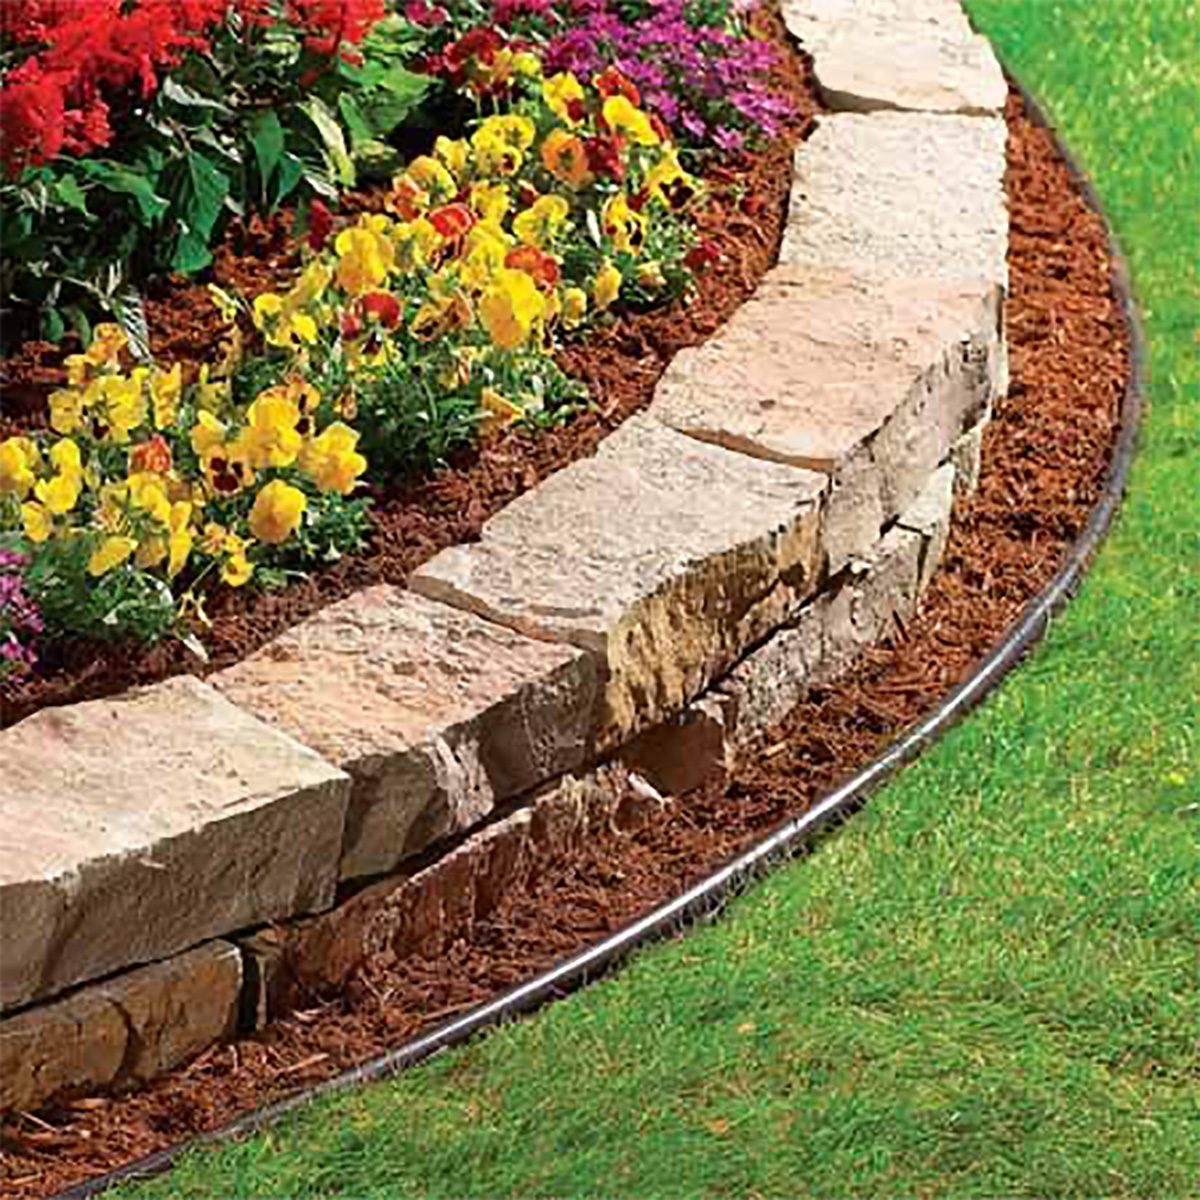 3 Landscape Edging Ideas To Keep Weeds and Grass Out Of Your Garden